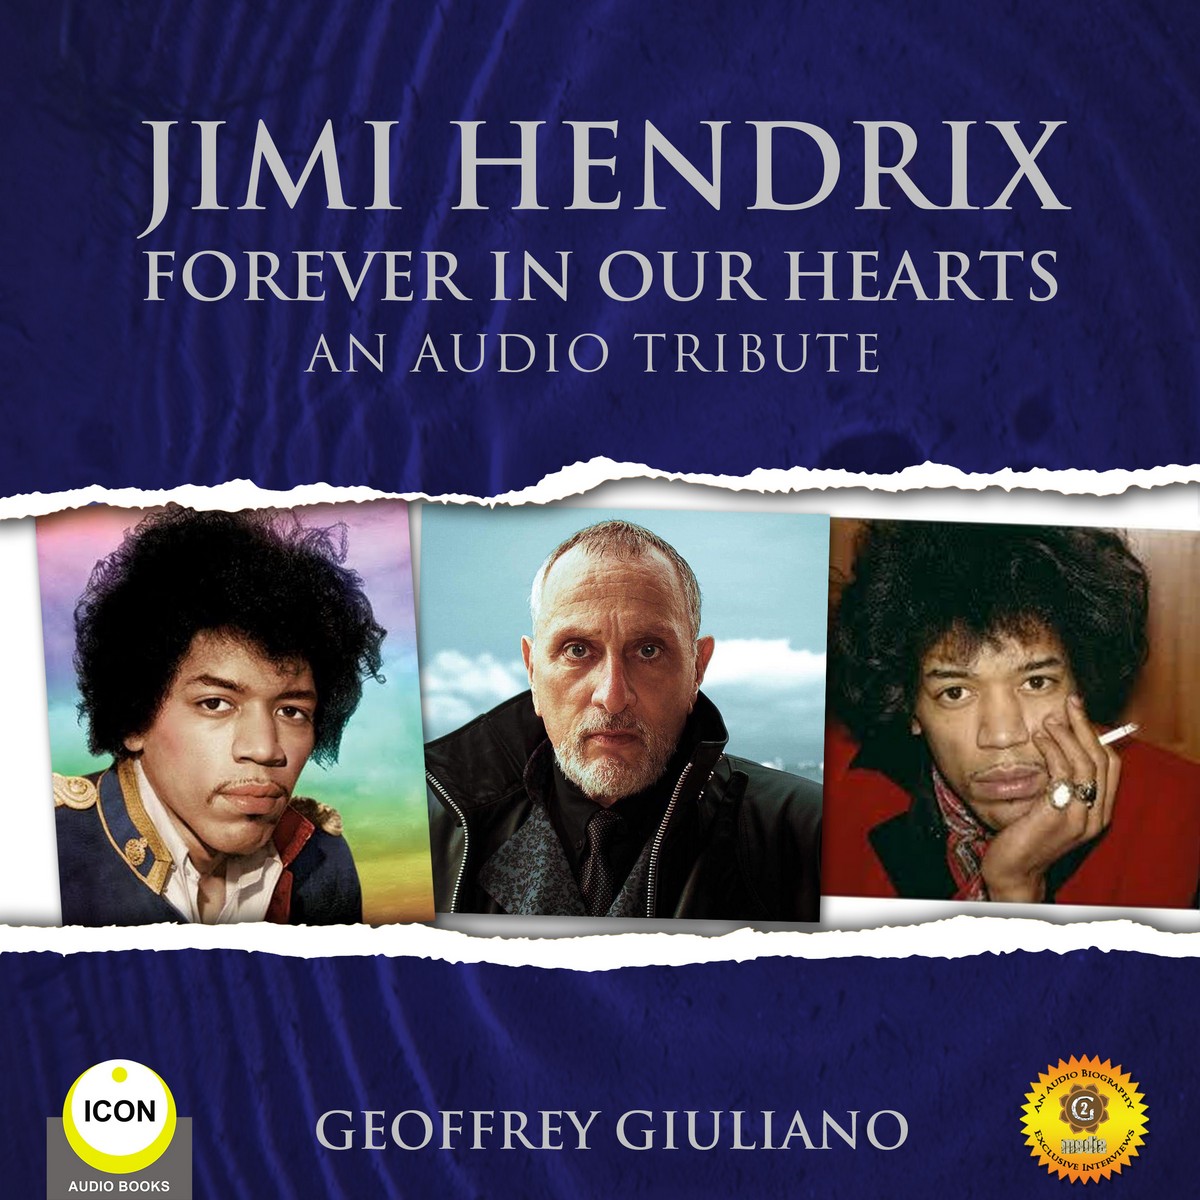 Jimi Hendrix Forever in Our Hearts – An Audio Tribute